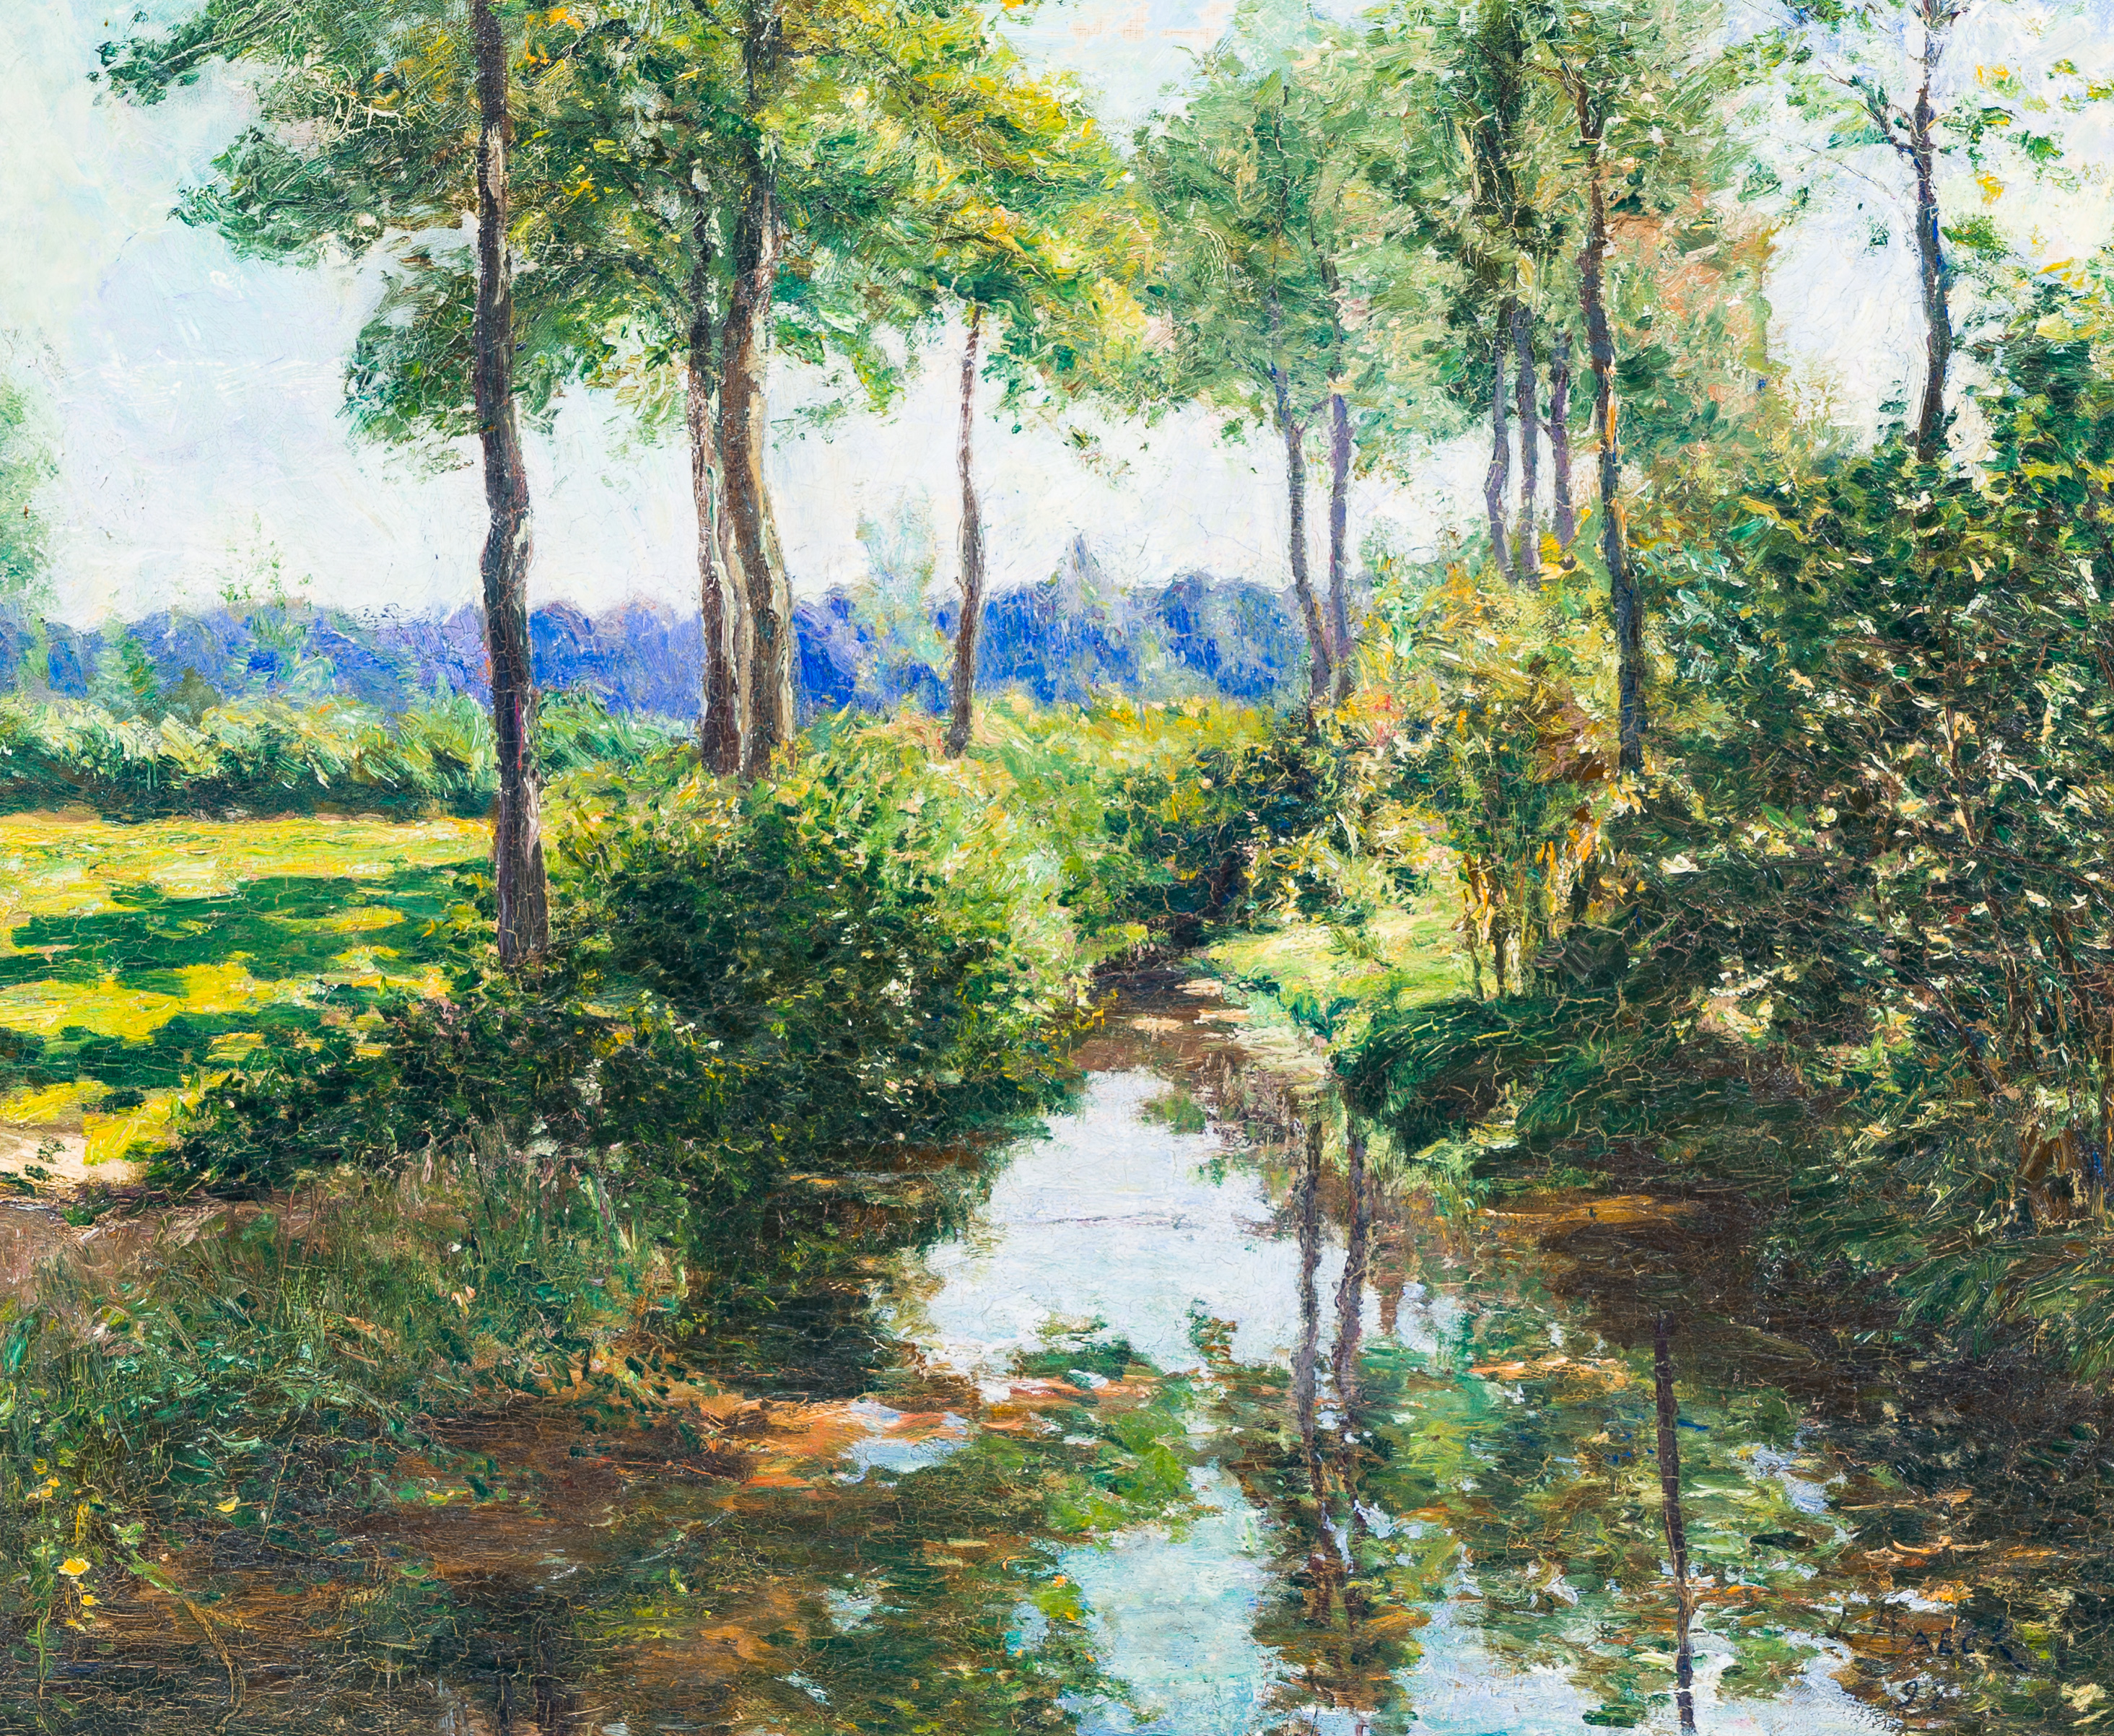 Leopold Haeck (1868-1928): Sunlit landscape with a stream, oil on canvas, dated (18)98